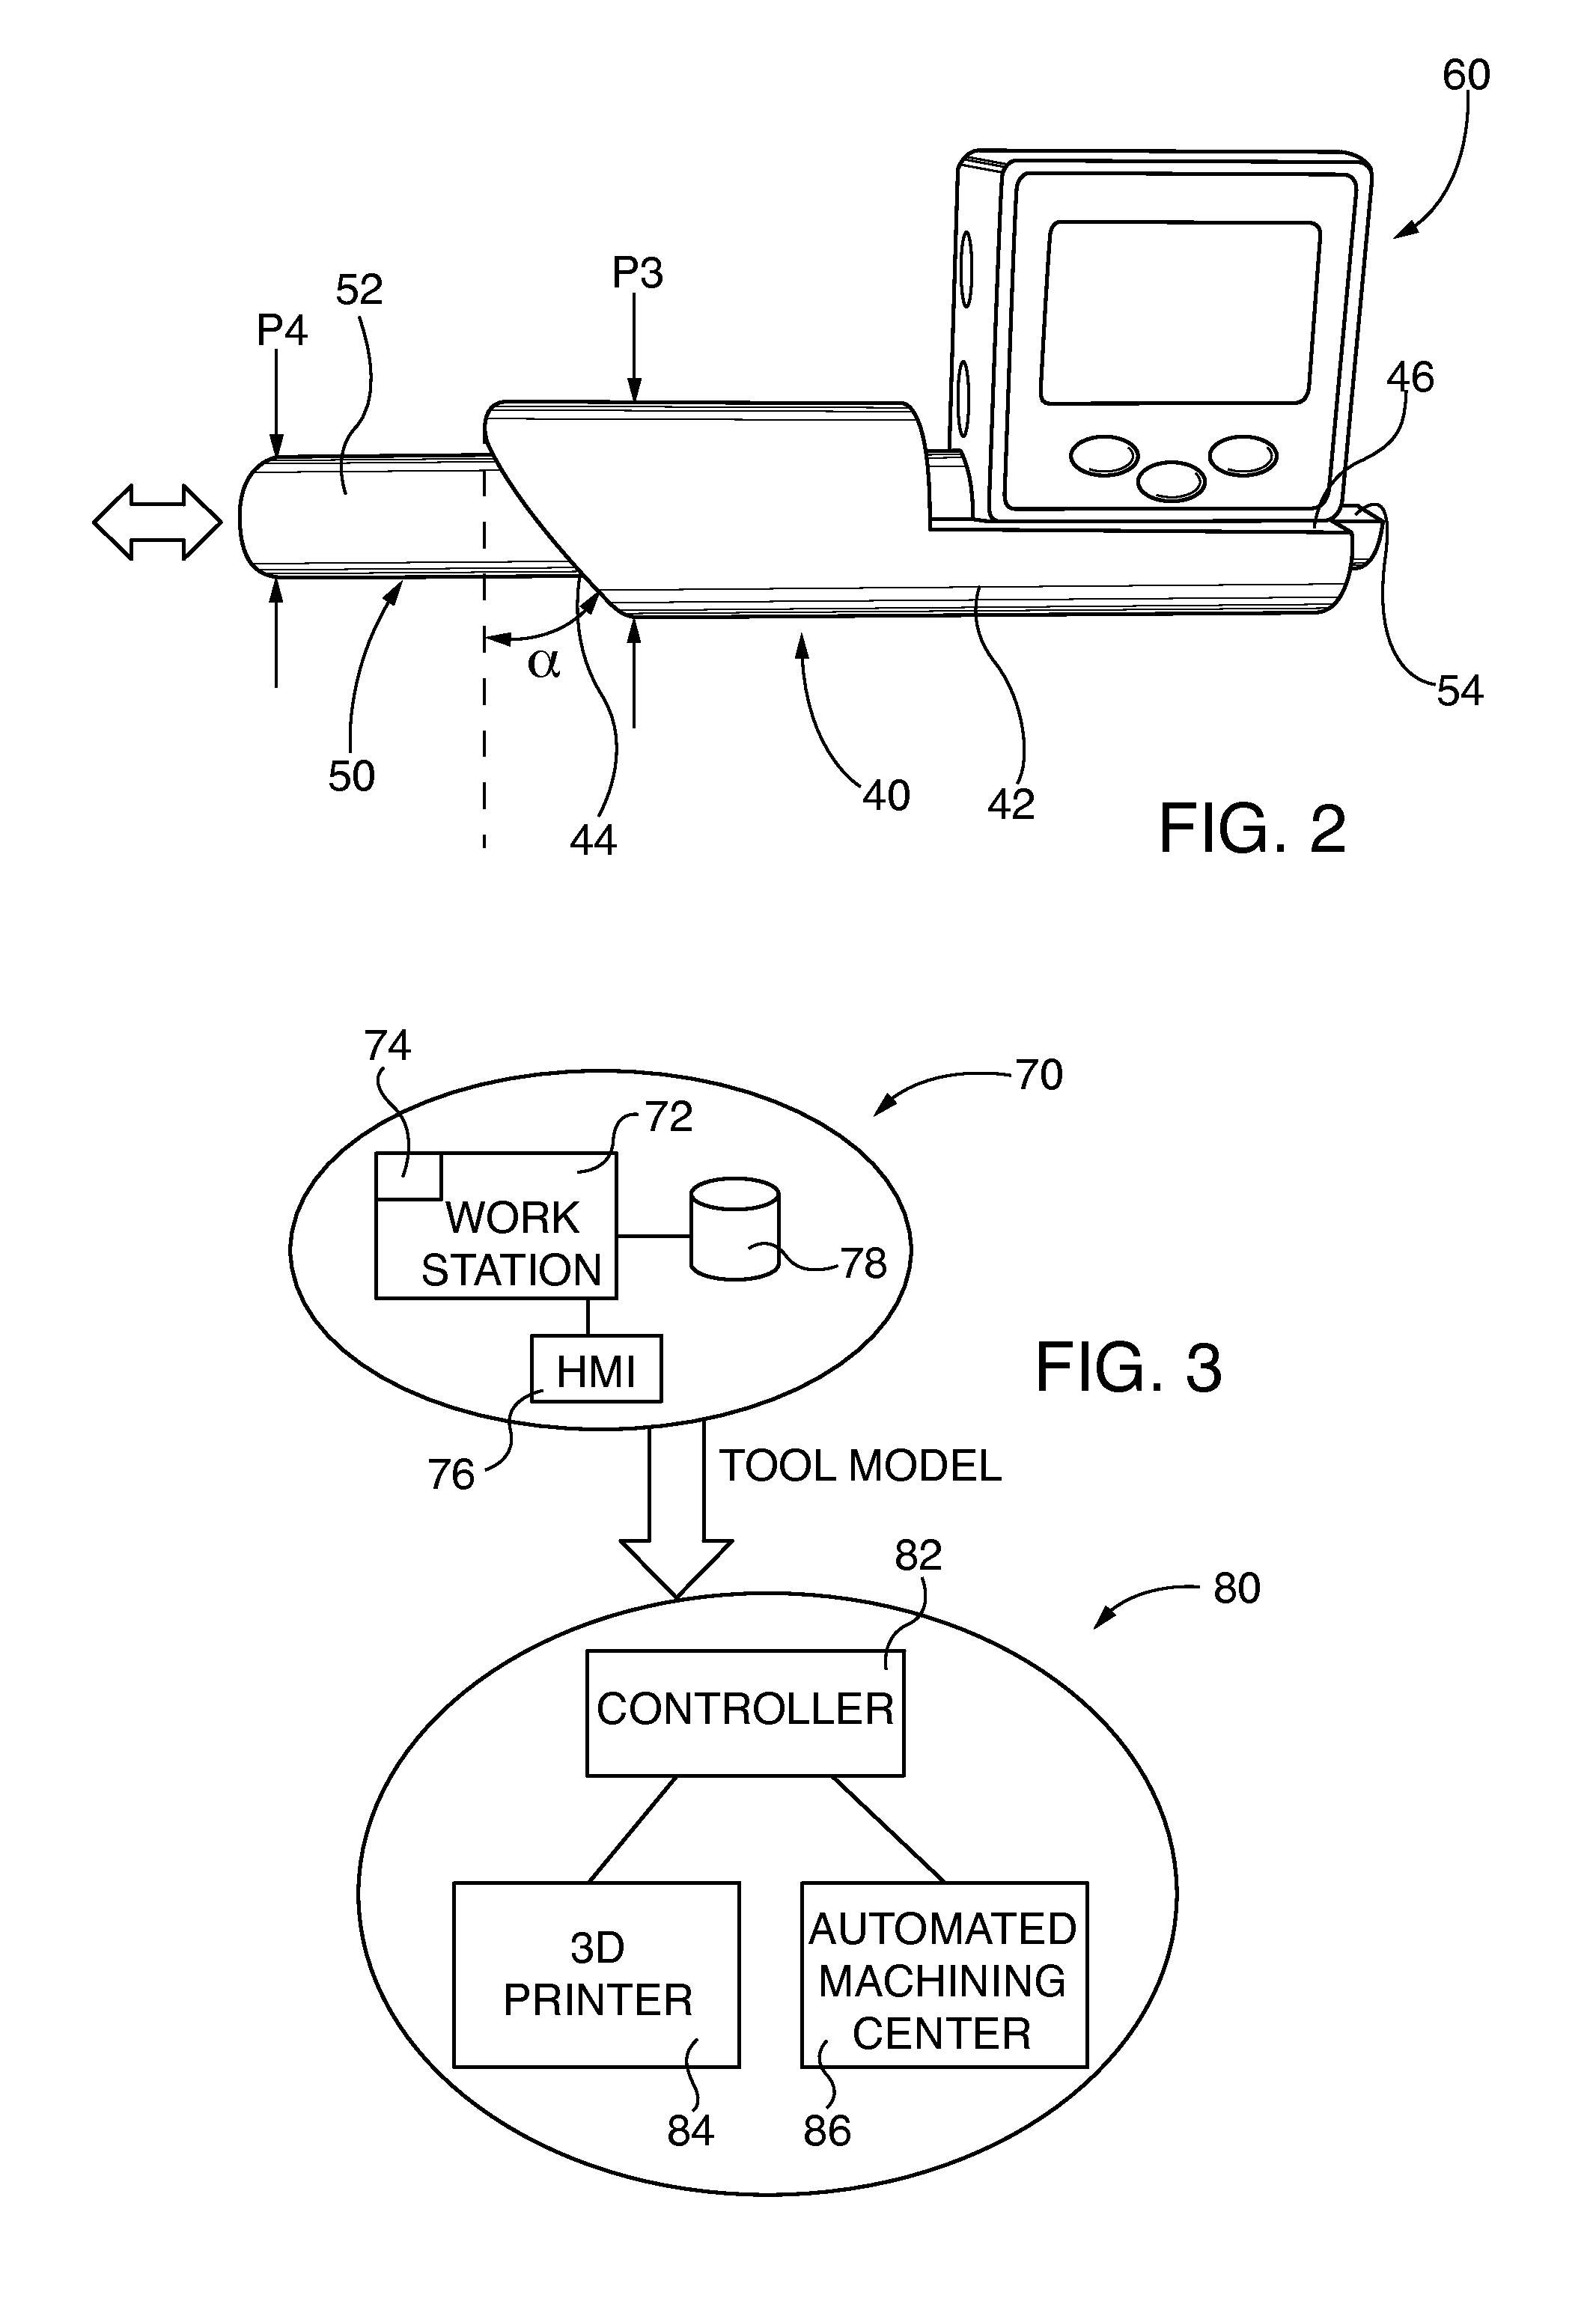 Combustion turbine engine combustor basket igniter port alignment verification tool and method for validating igniter alignment